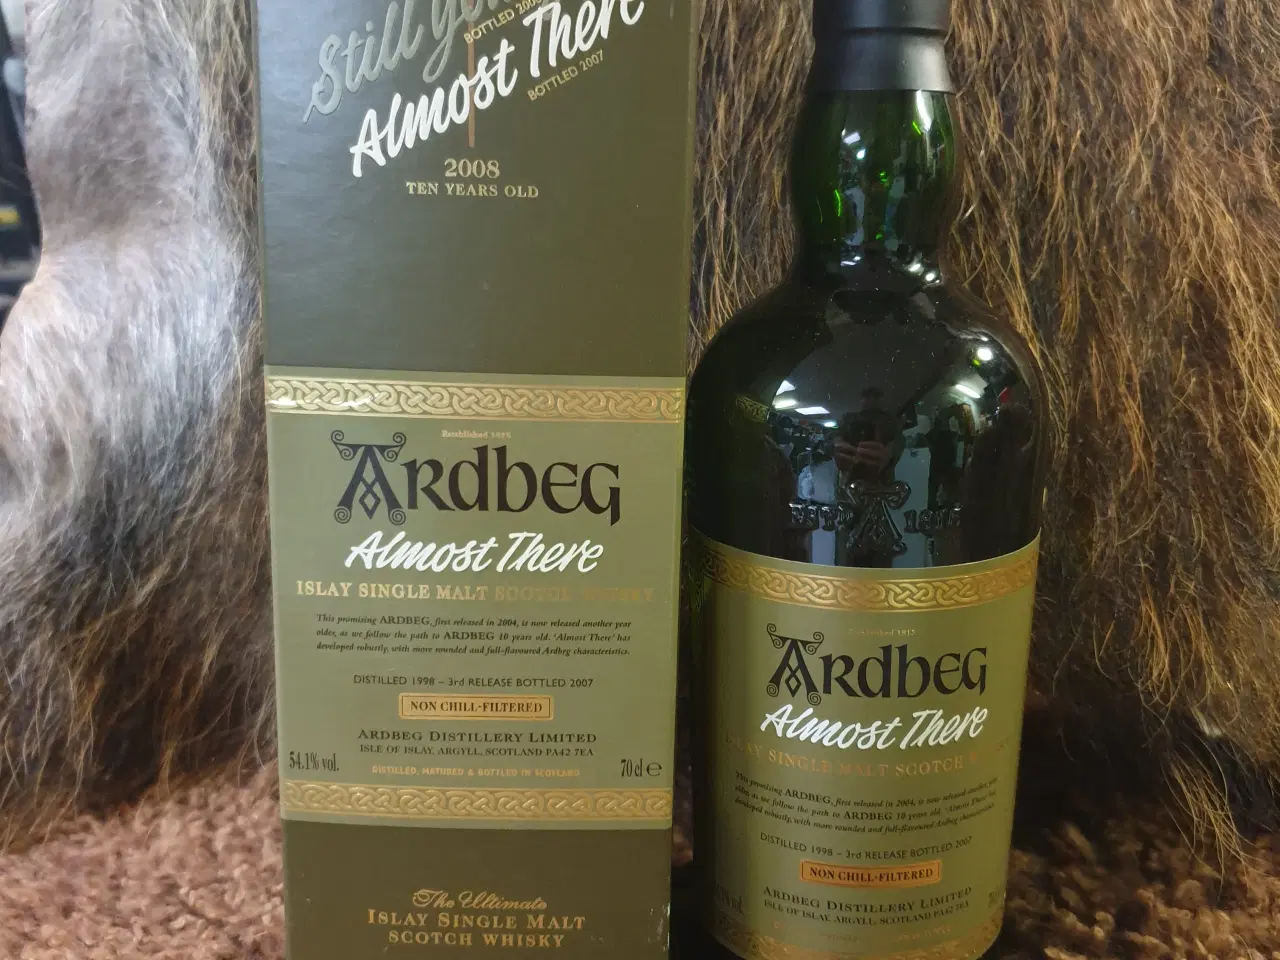 Billede 1 - Ardbeg - Almost There